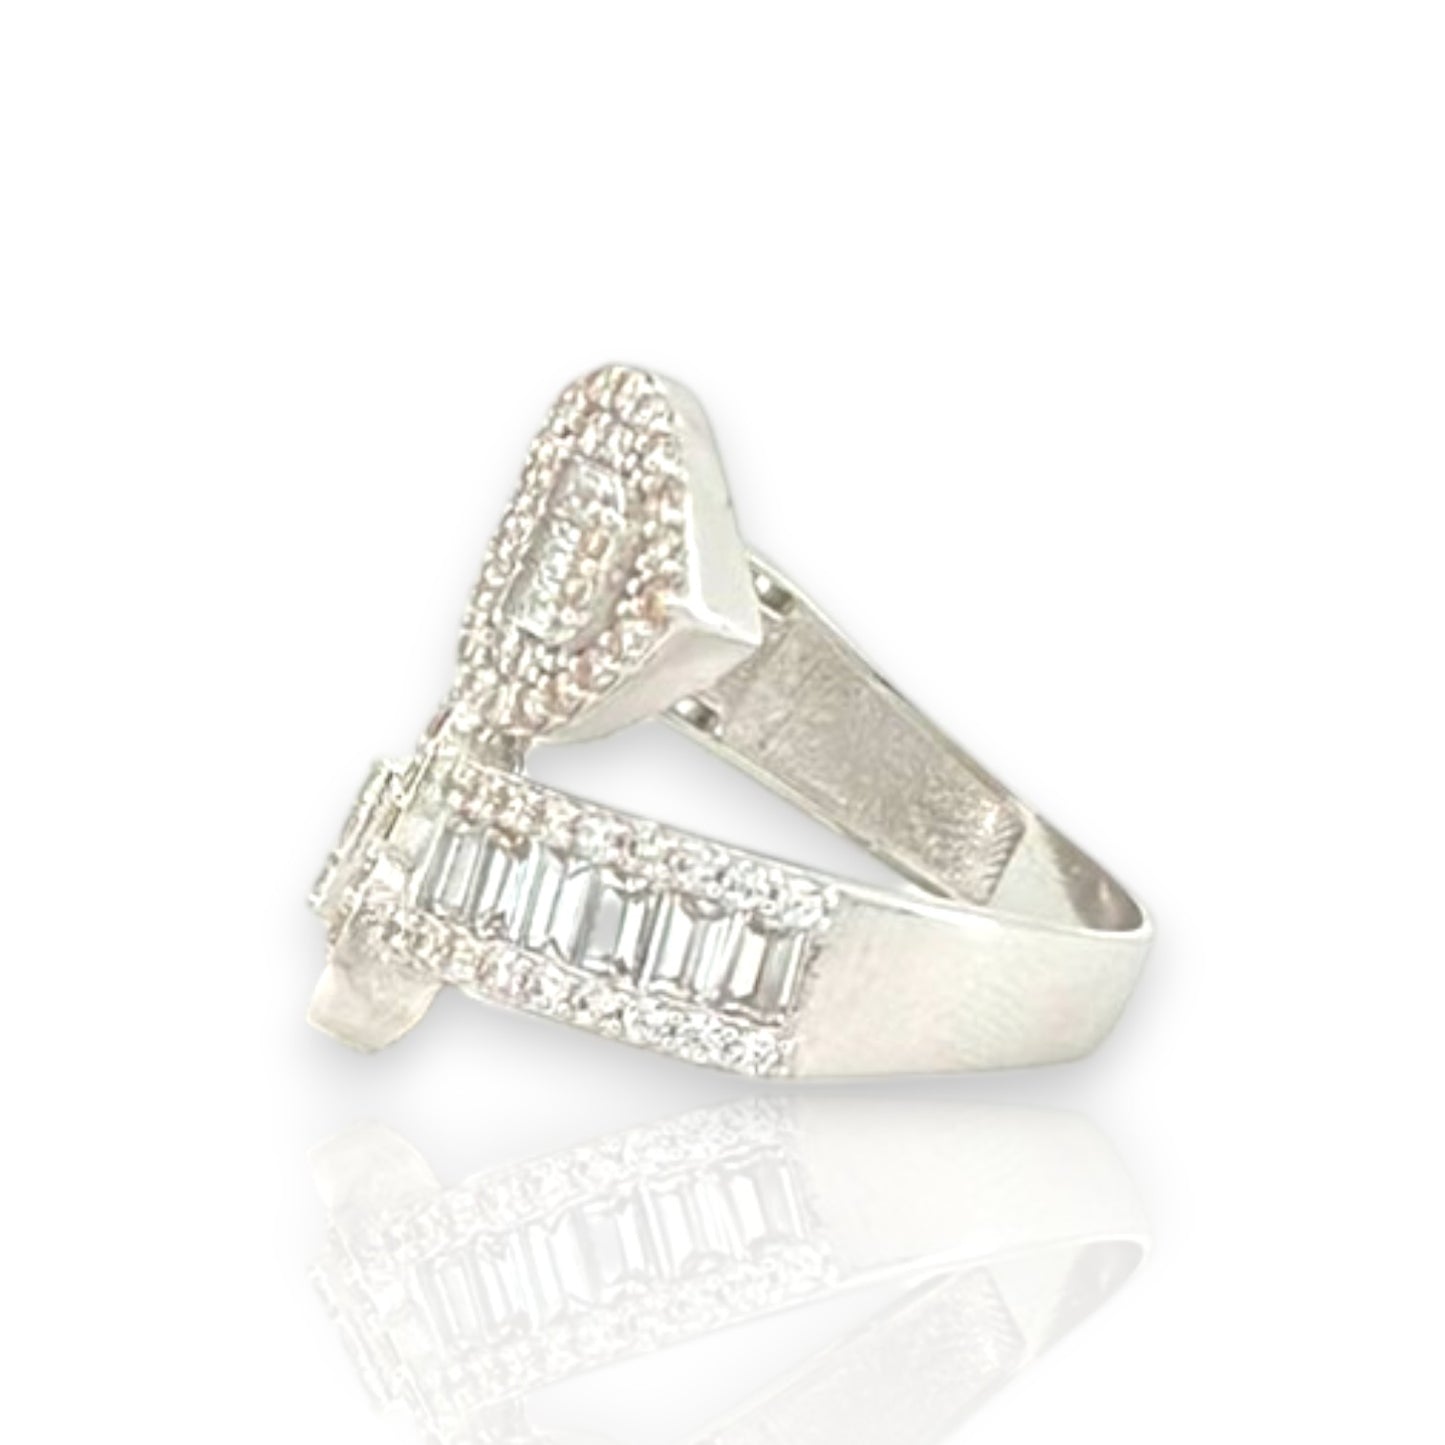 Baguette and Round Cut Heart Wrap Ring With CZ - 10K White Gold